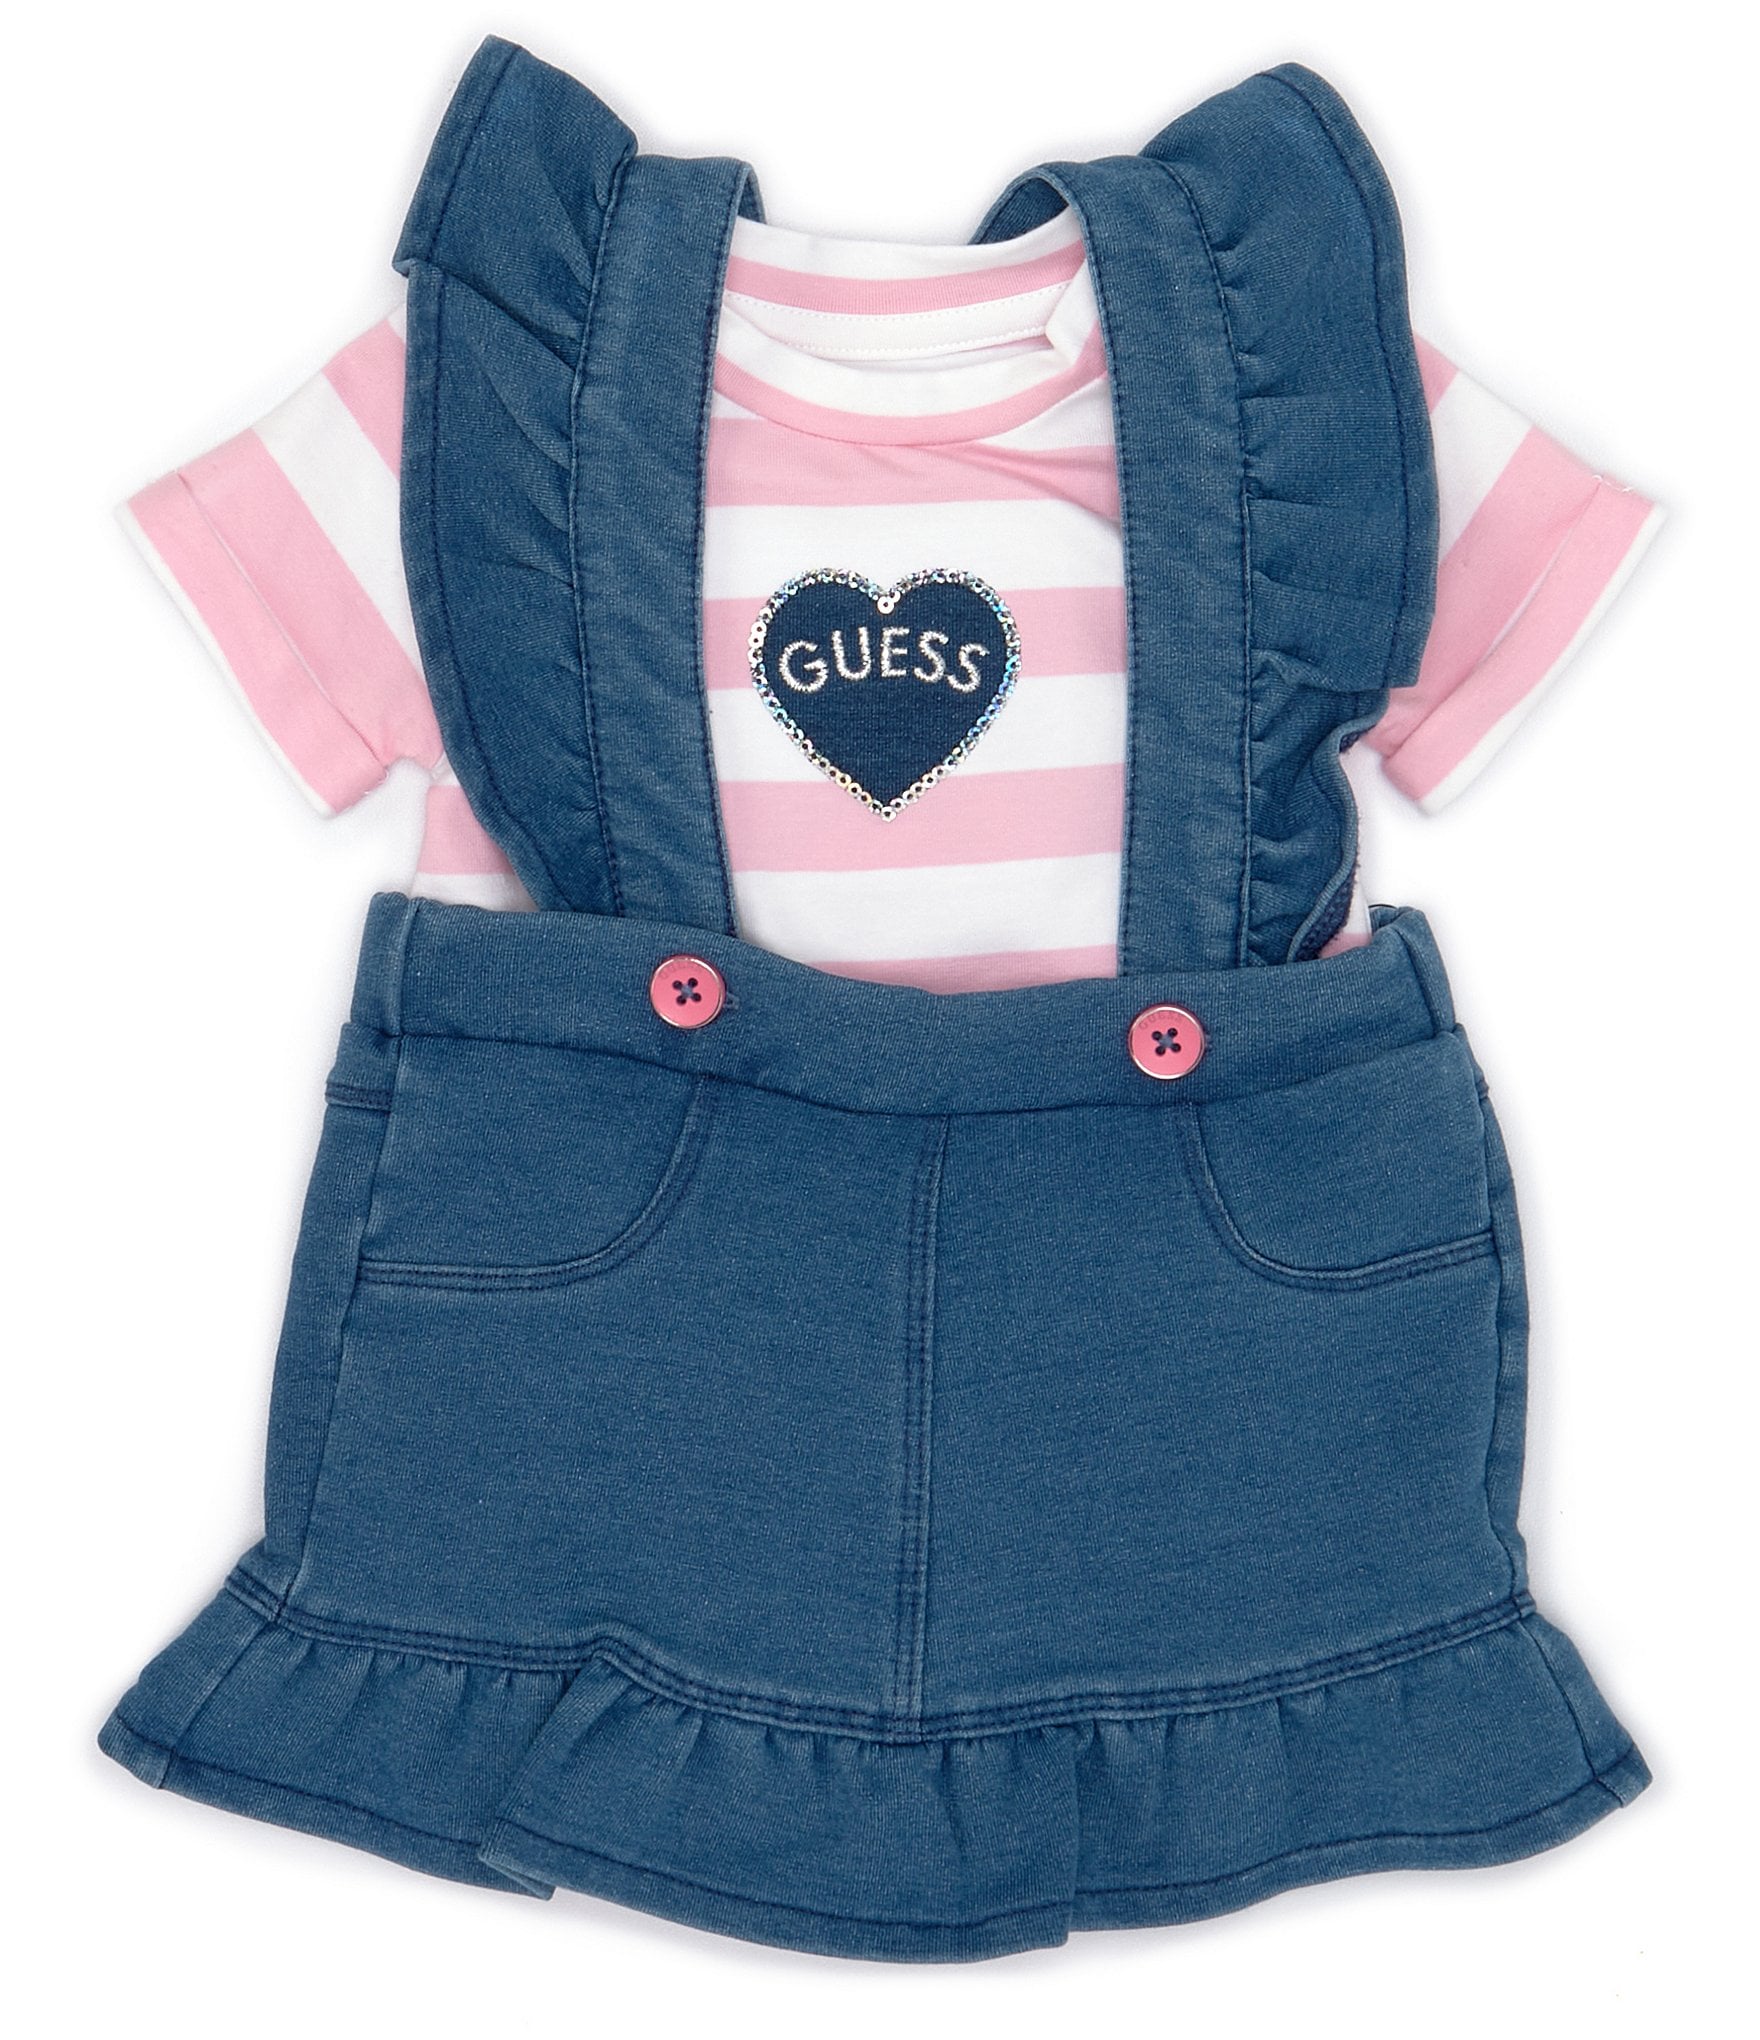 Buy Bonnie Jean Girl's Denim Cat Dress for Baby and Toddler (18 Months) at  Amazon.in